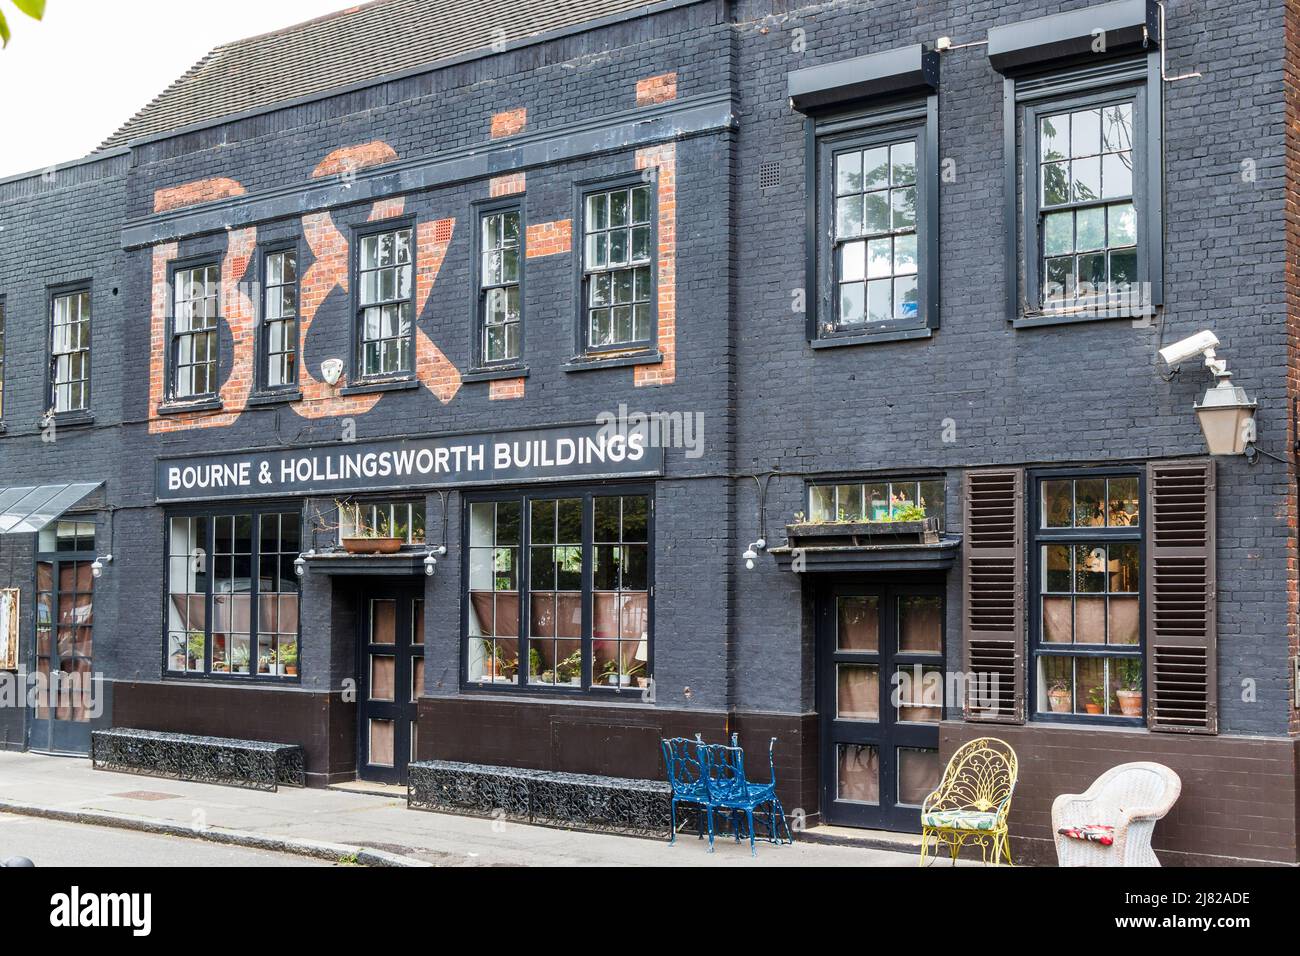 The Bourne & Hollingsworth buildings, a bar and restaurant on Northampton Road in Clerkenwell, London, UK Stock Photo